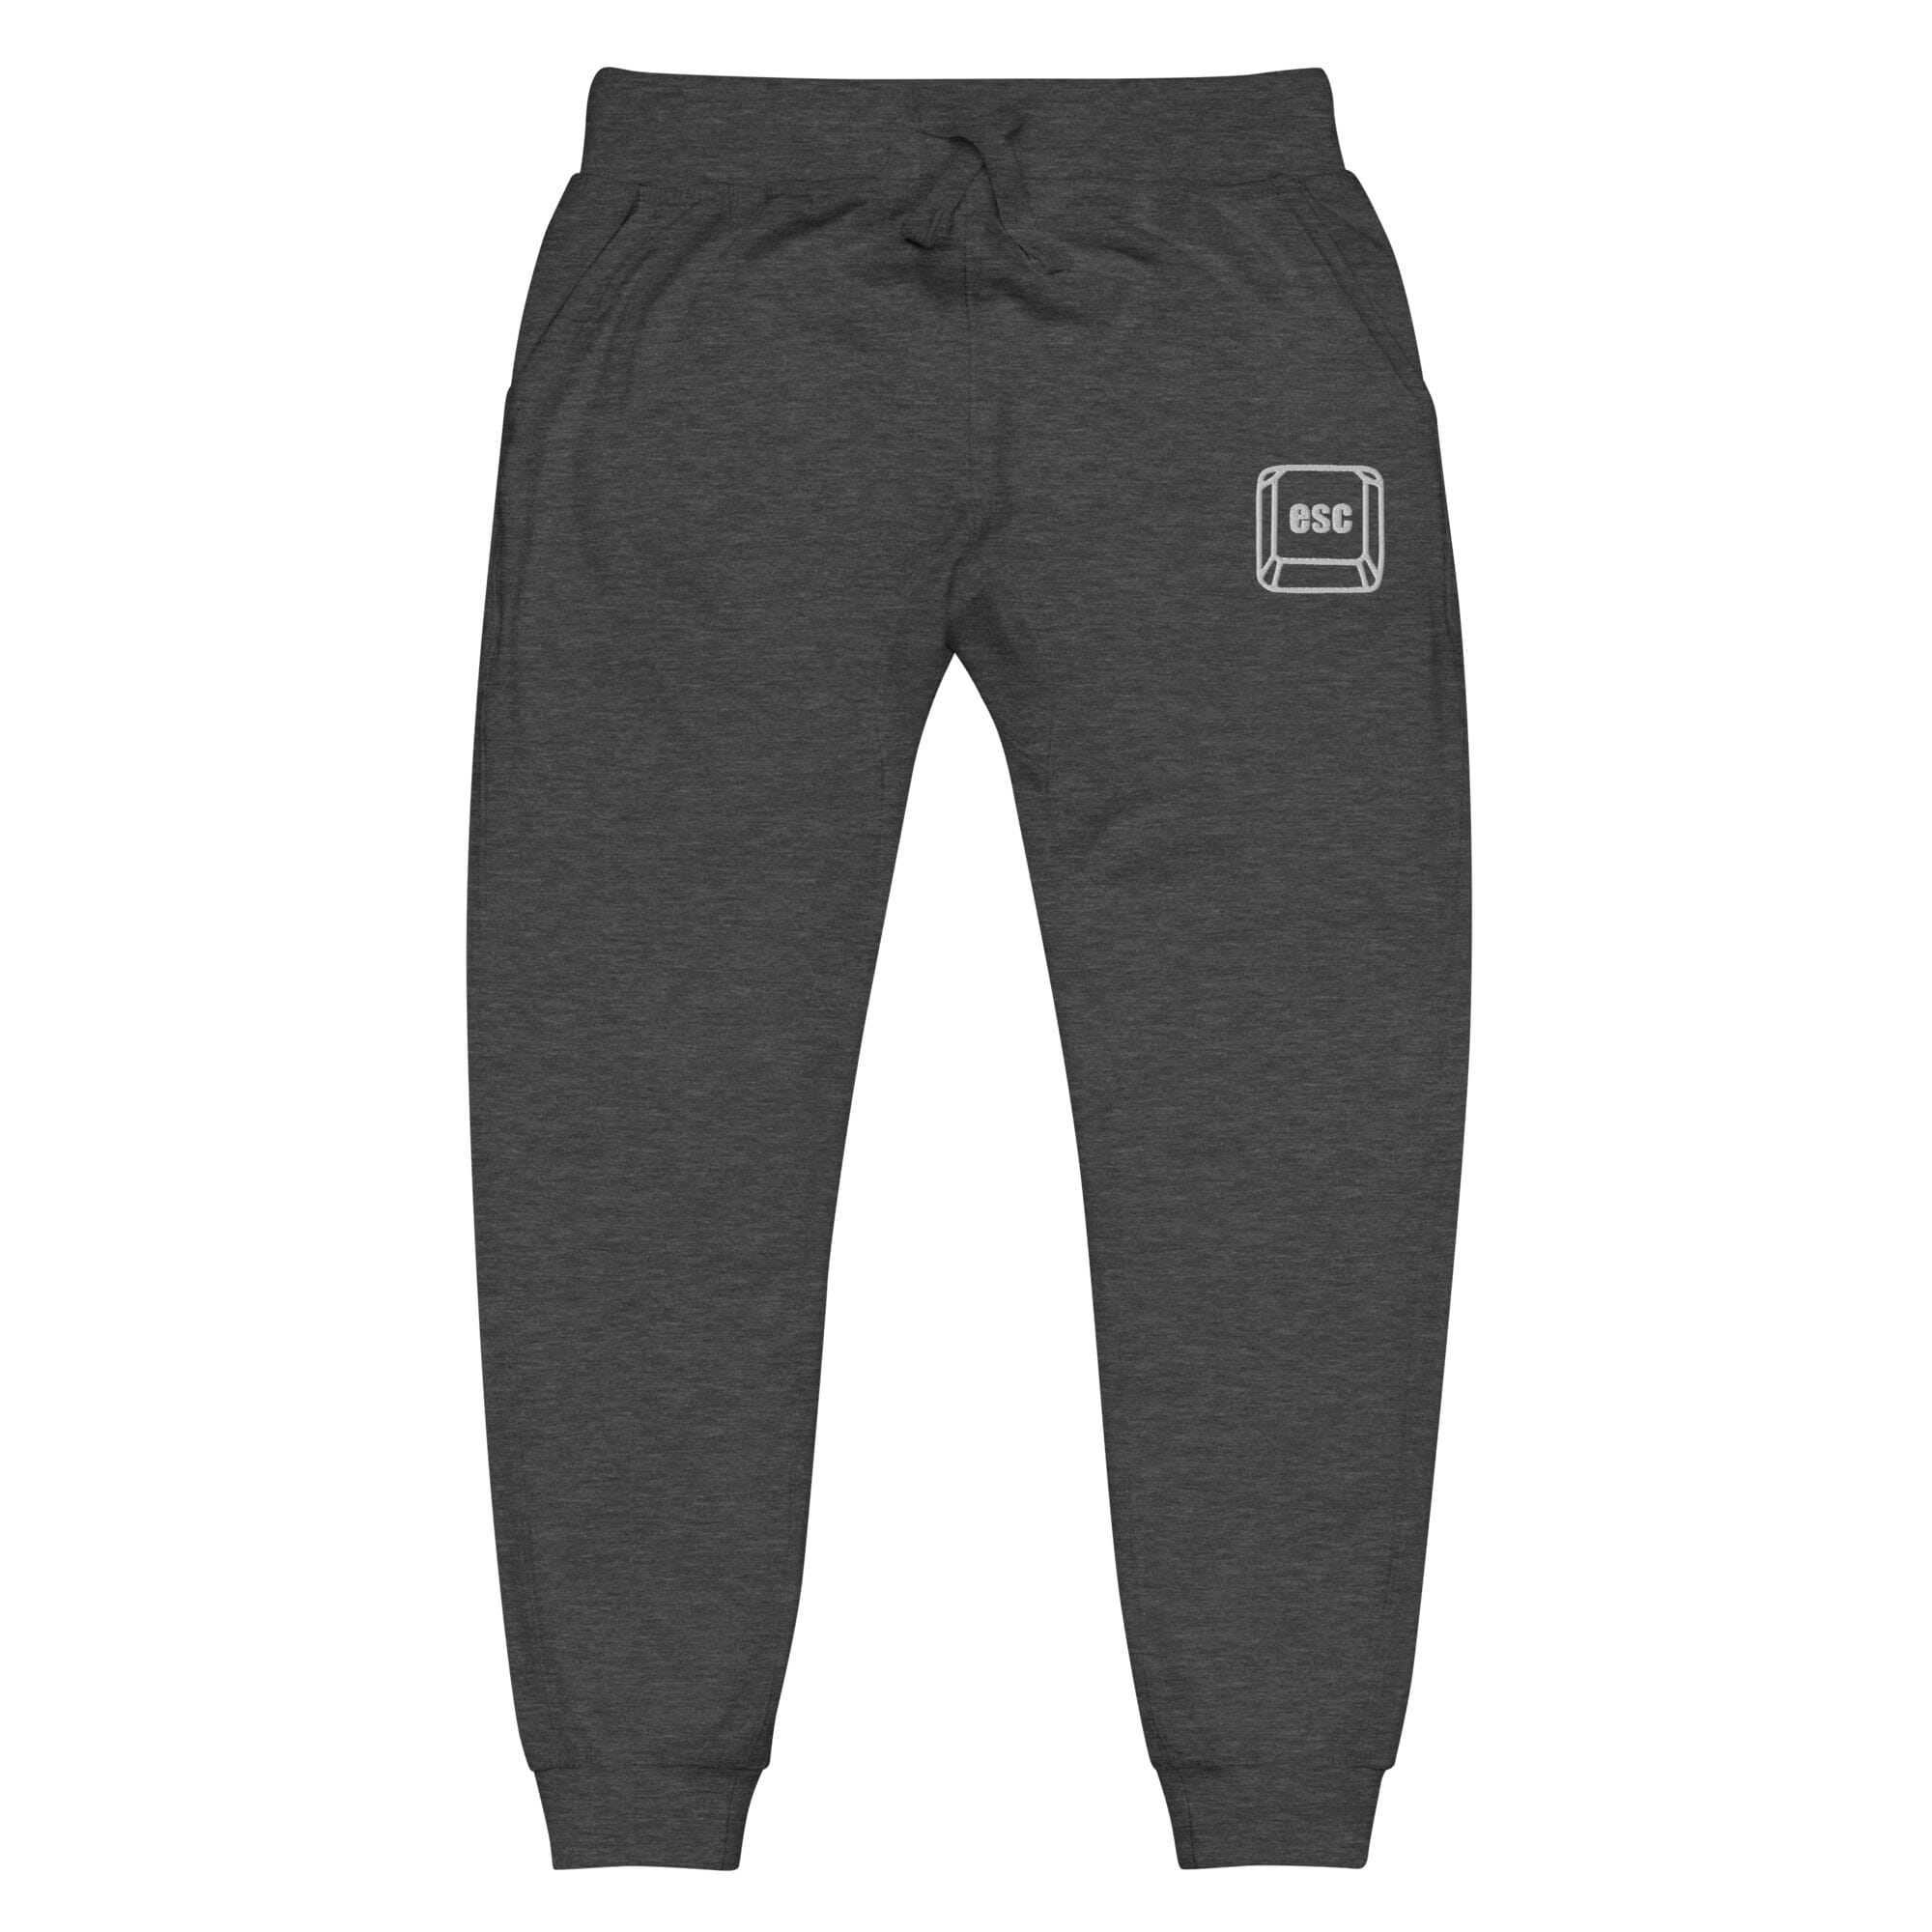 Escape Key | Unisex fleece sweatpants | Gamer Affirmations Threads & Thistles Inventory Charcoal Heather XS 